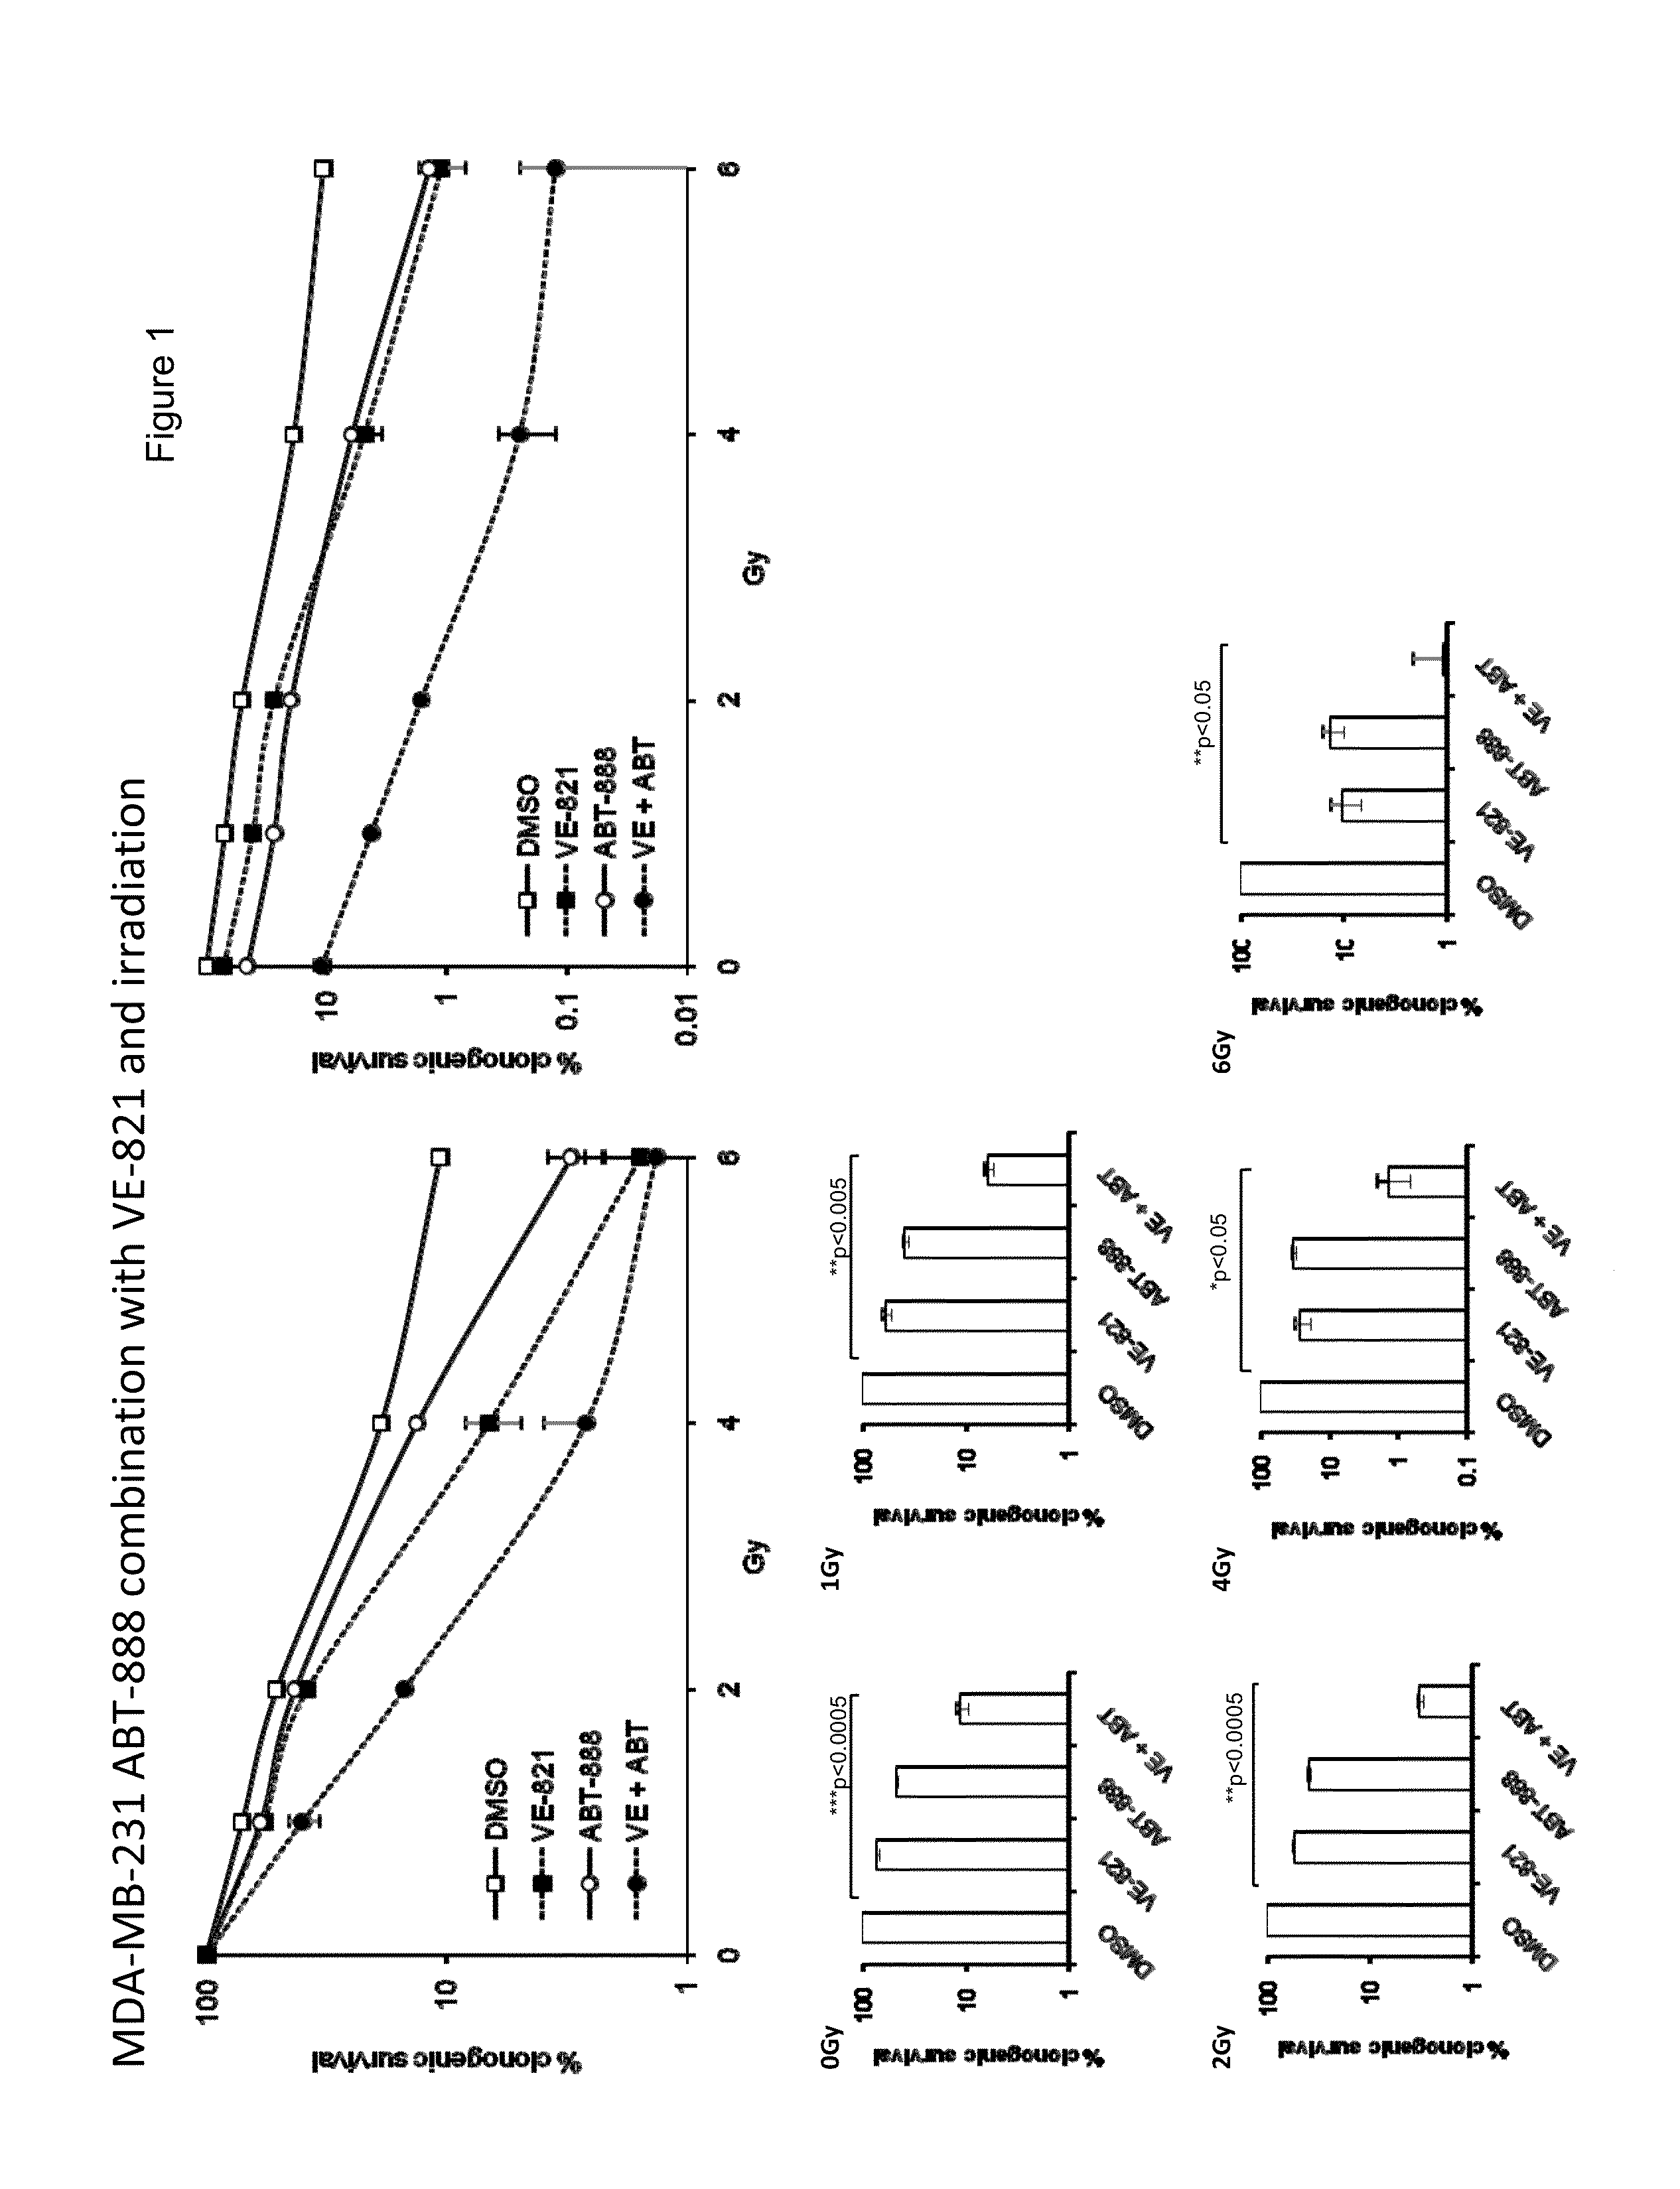 Compounds useful as inhibitors of atr kinase
and combination therapies thereof